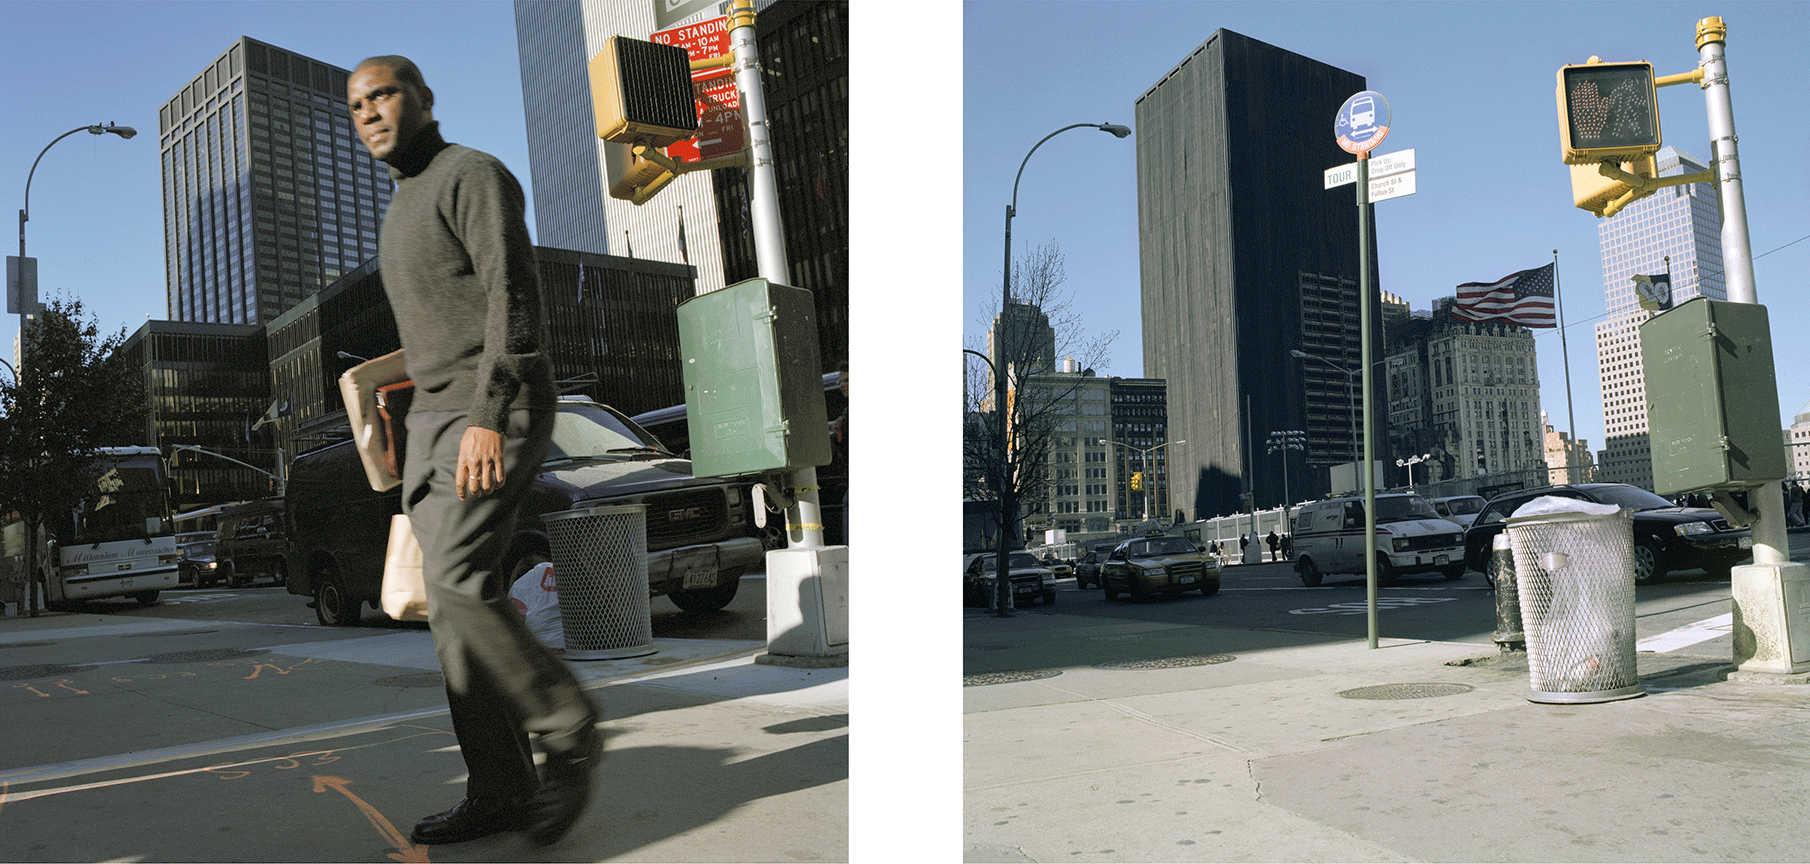  Southeast corner of Fulton and Church Streets, October 1999 (left) and April 2004 (right). 